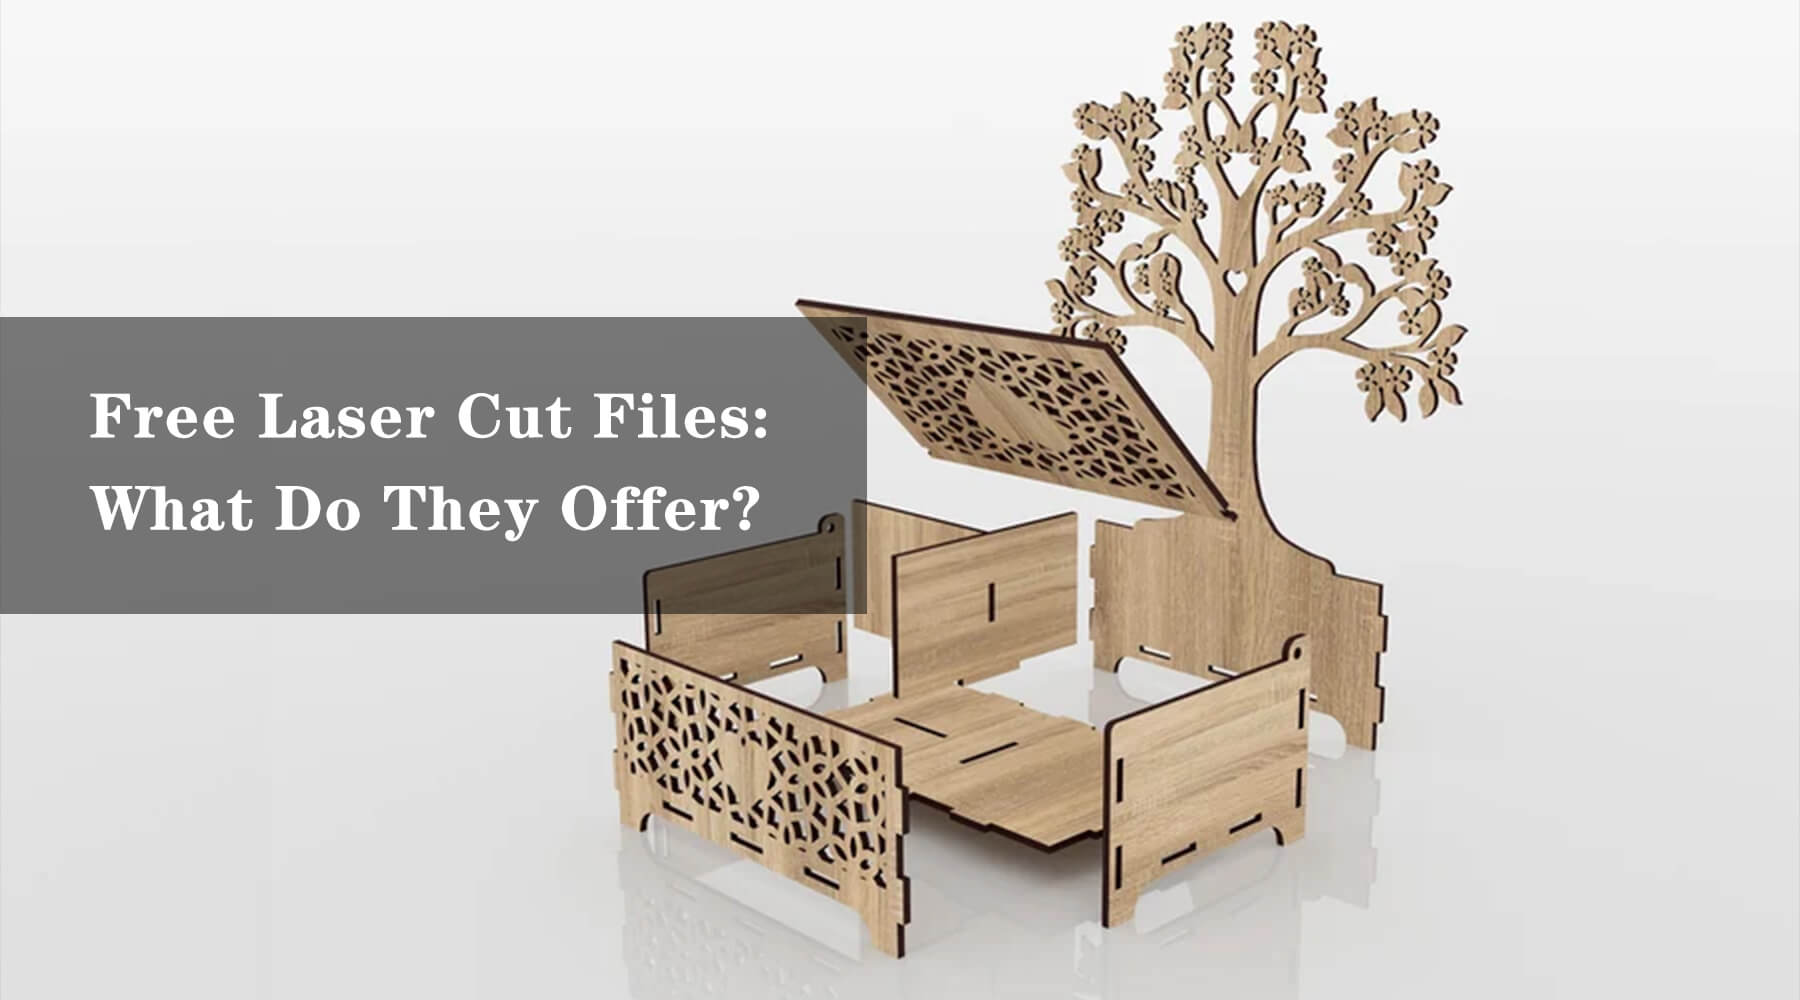 Free Laser Cut Files: What Do They Offer?